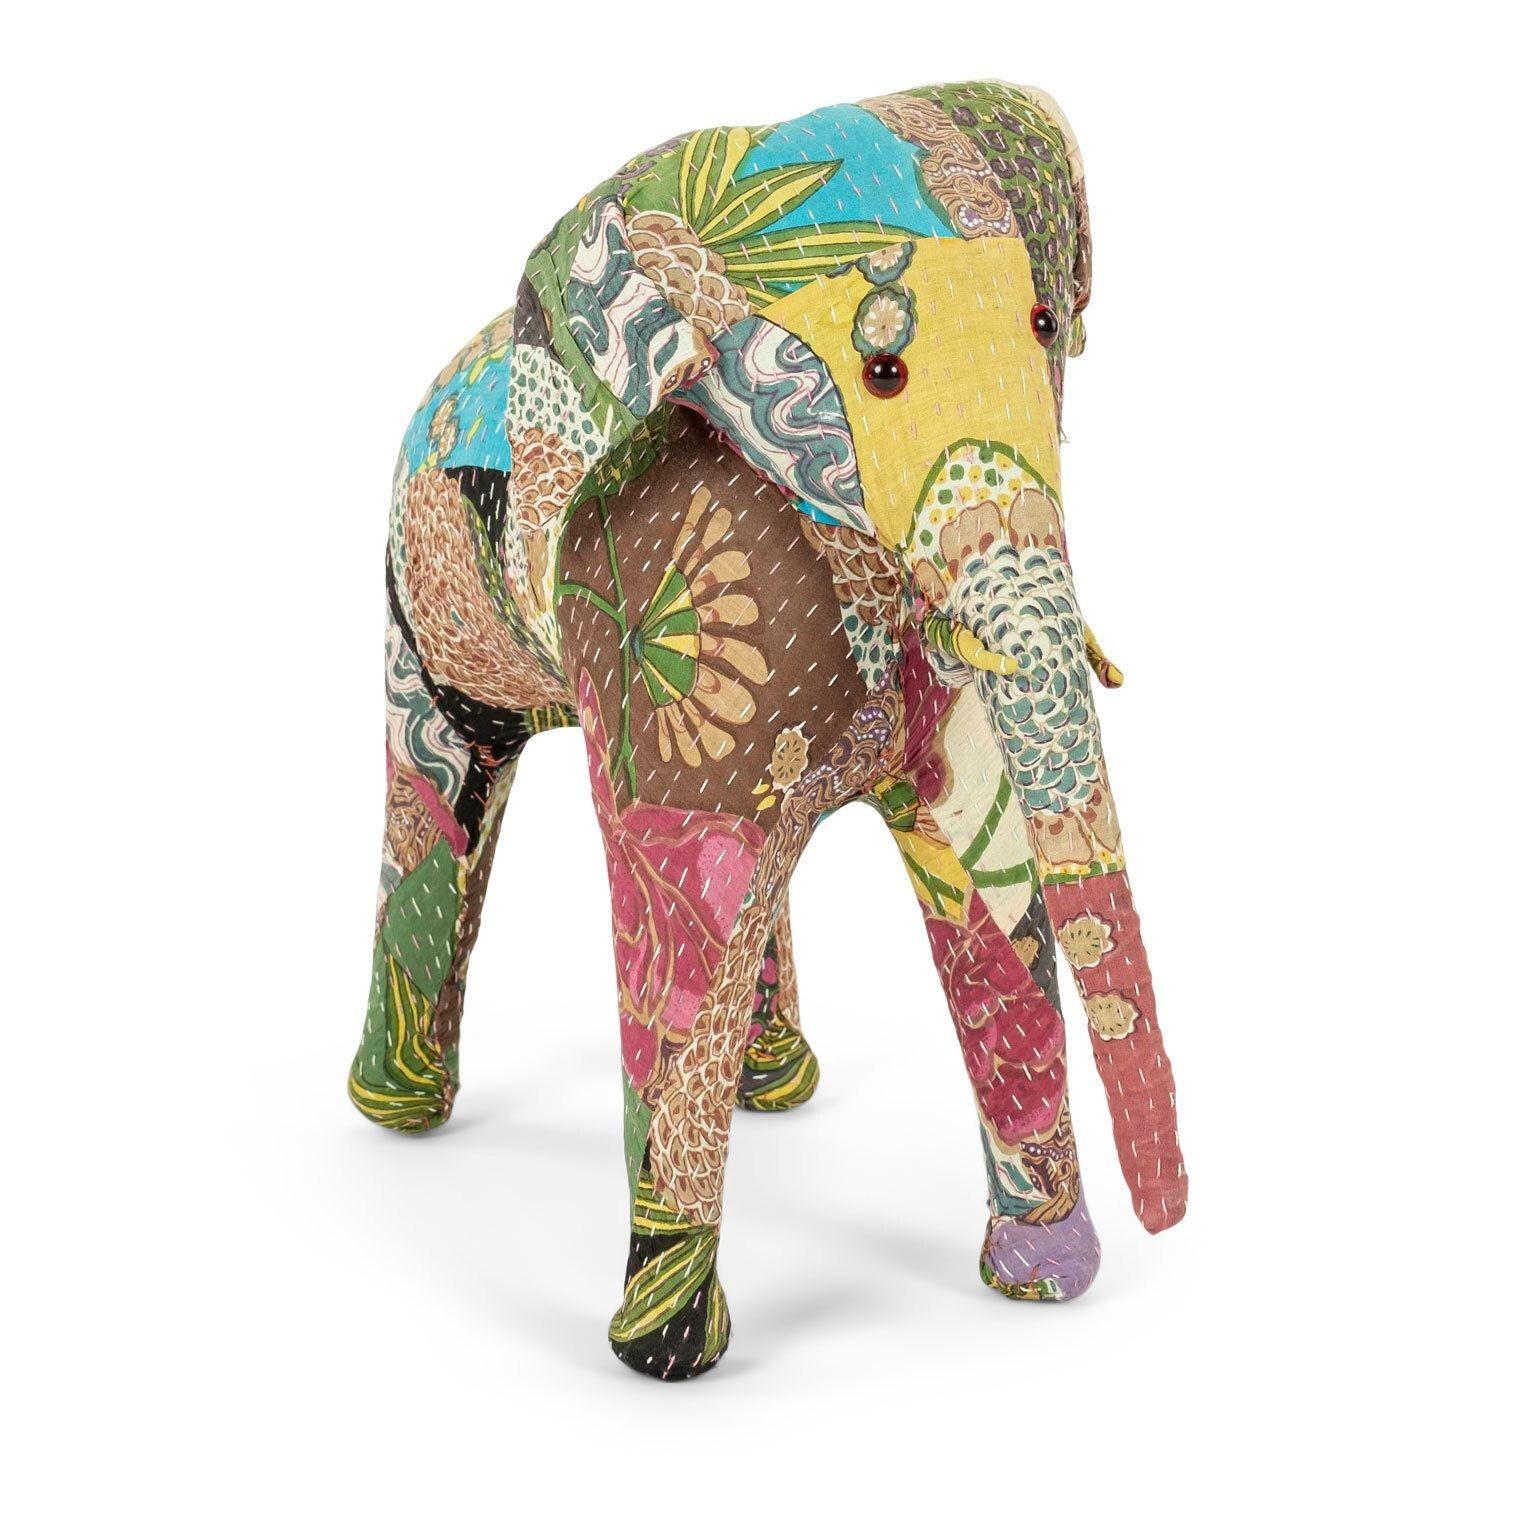 Folk Art Vintage Cotton Elephant Covered in Indian Textiles For Sale